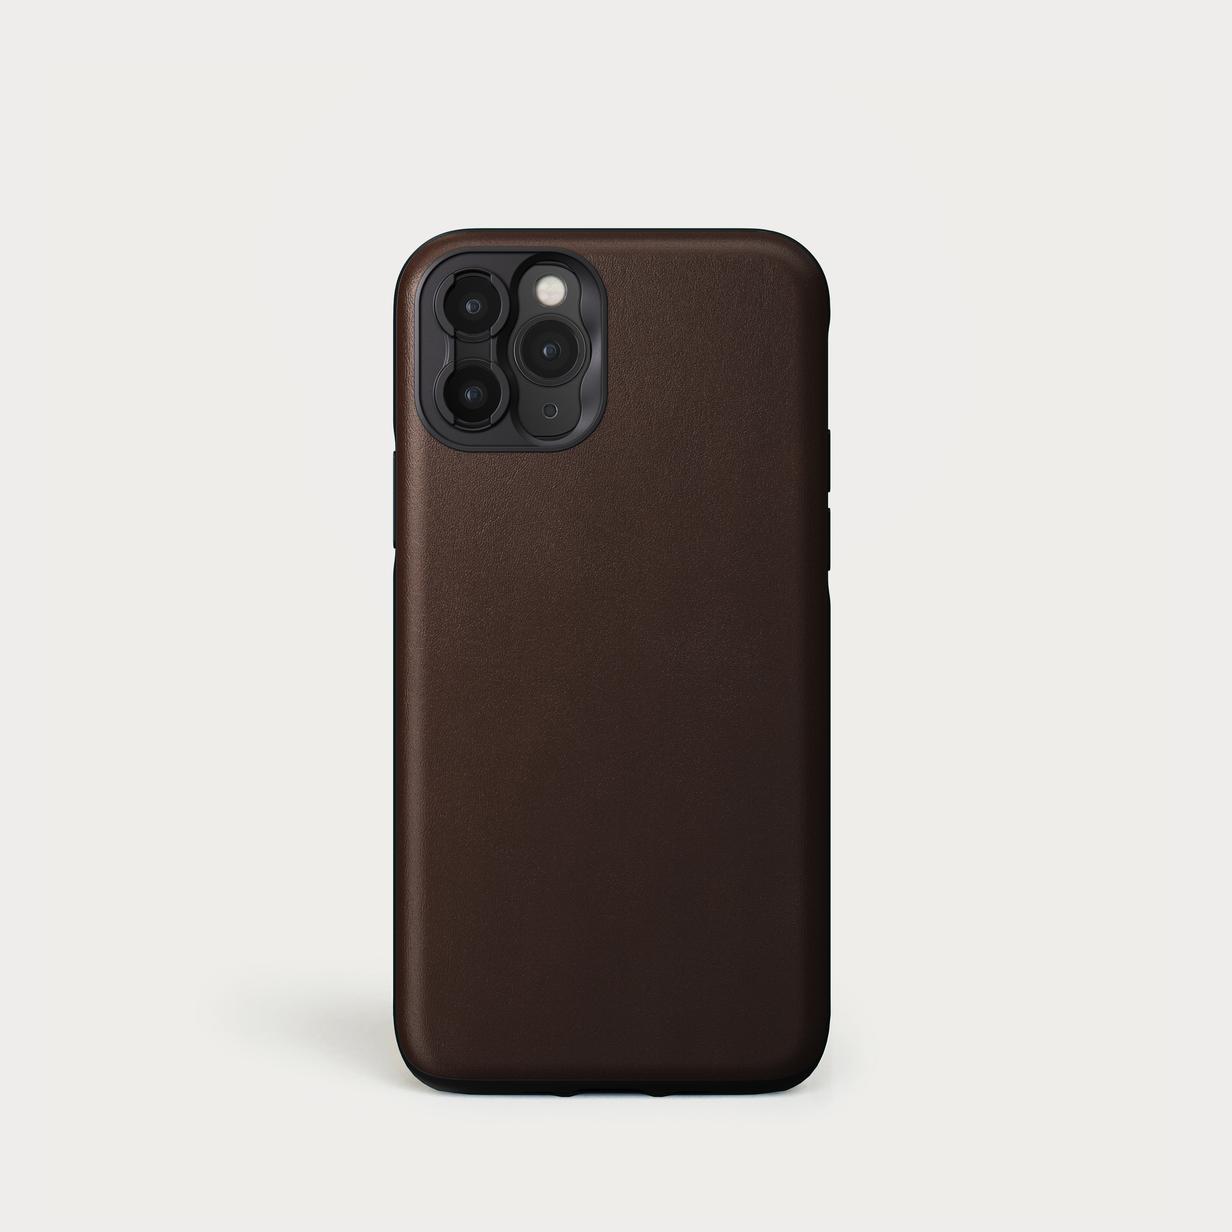 Nomand NM21 WR0 R60 i Phone11 Pro Rugged Leather Case Brown Moment 01